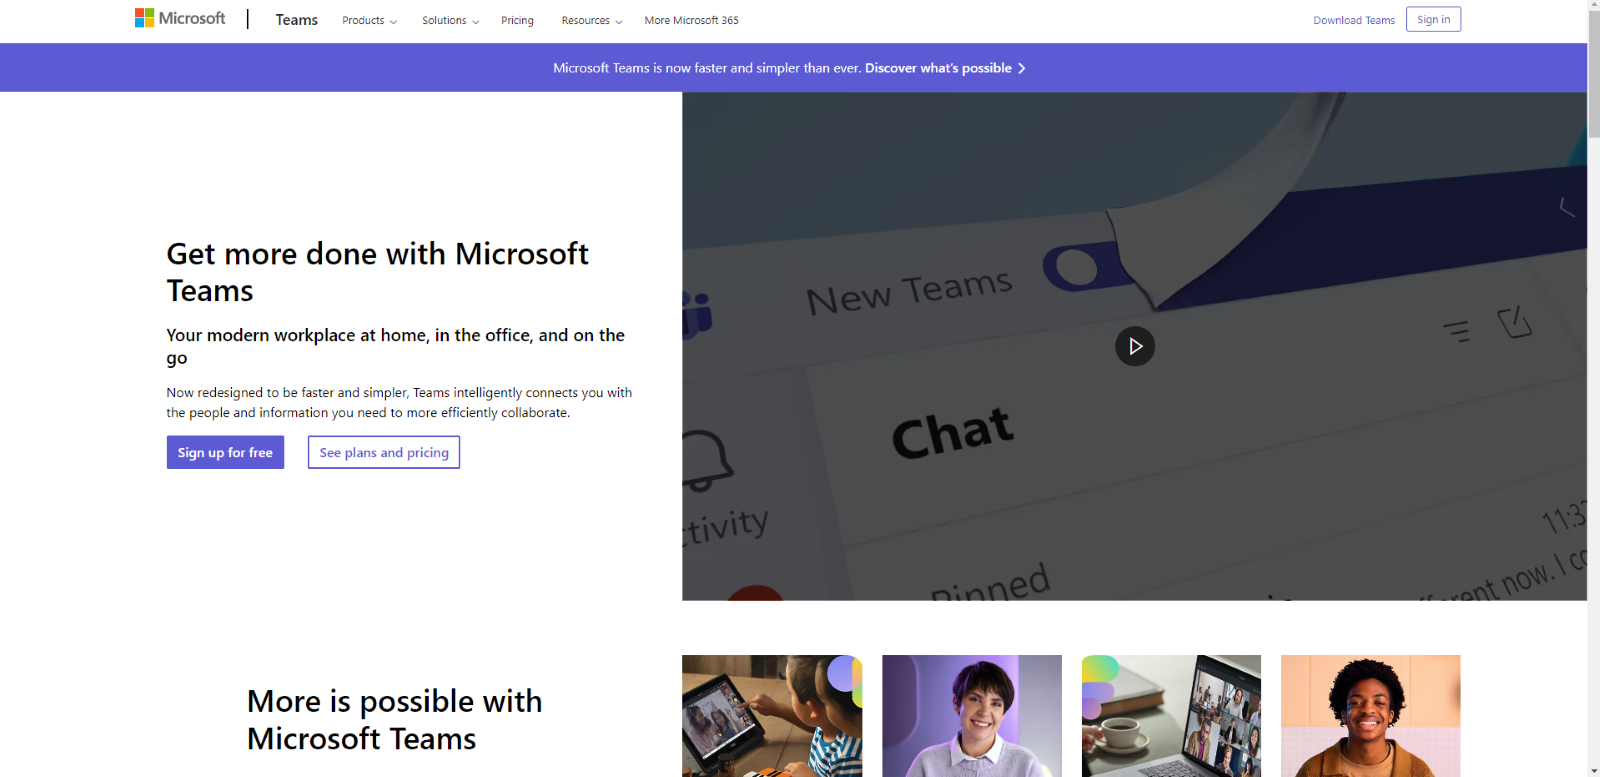 The official Microsoft Teams website